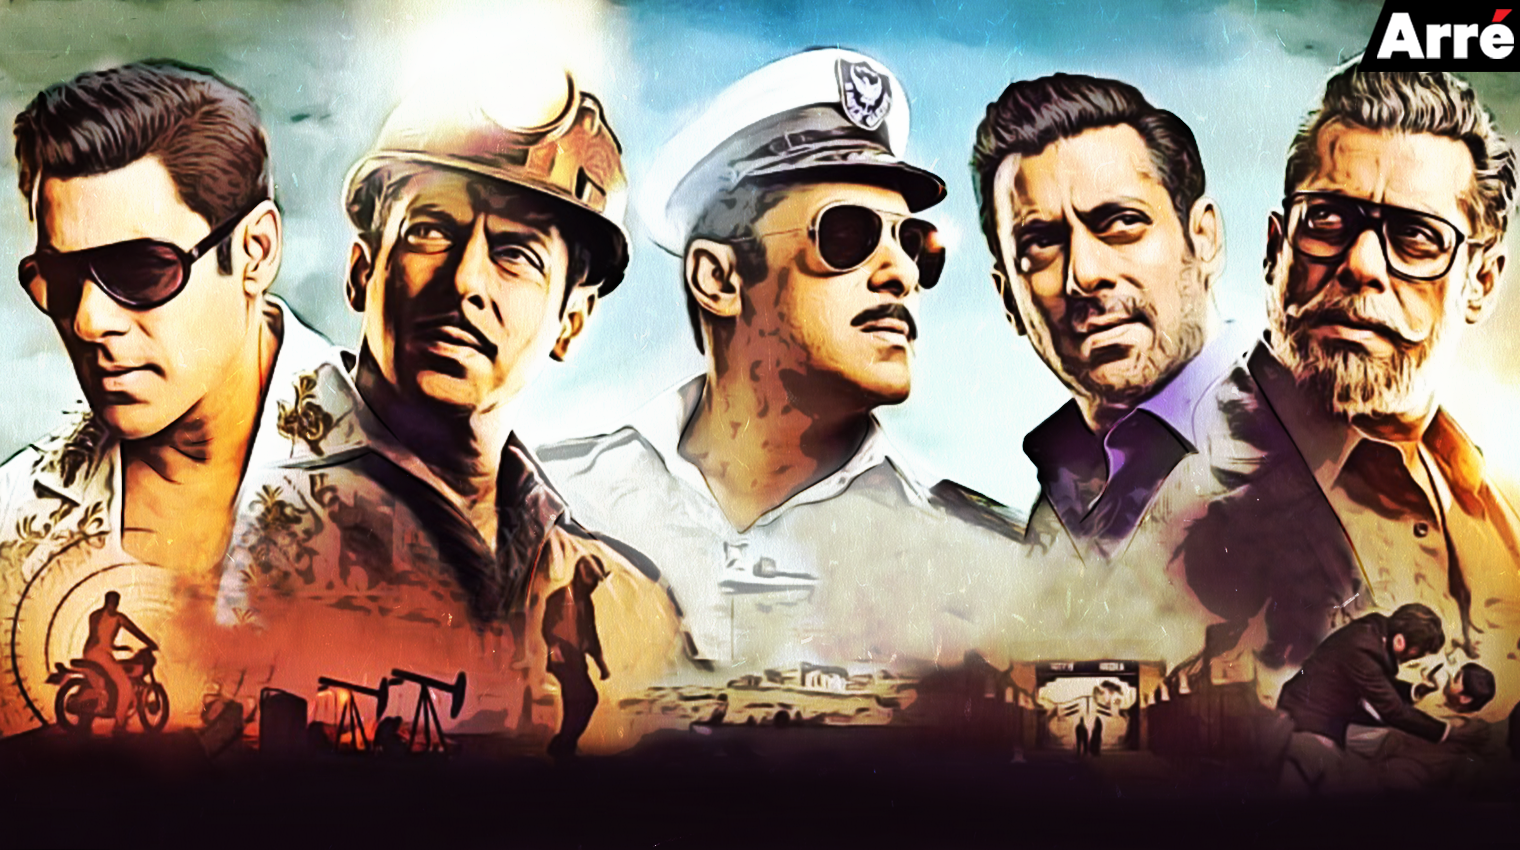 Bharatreview - Bharat 2019 Movie - HD Wallpaper 